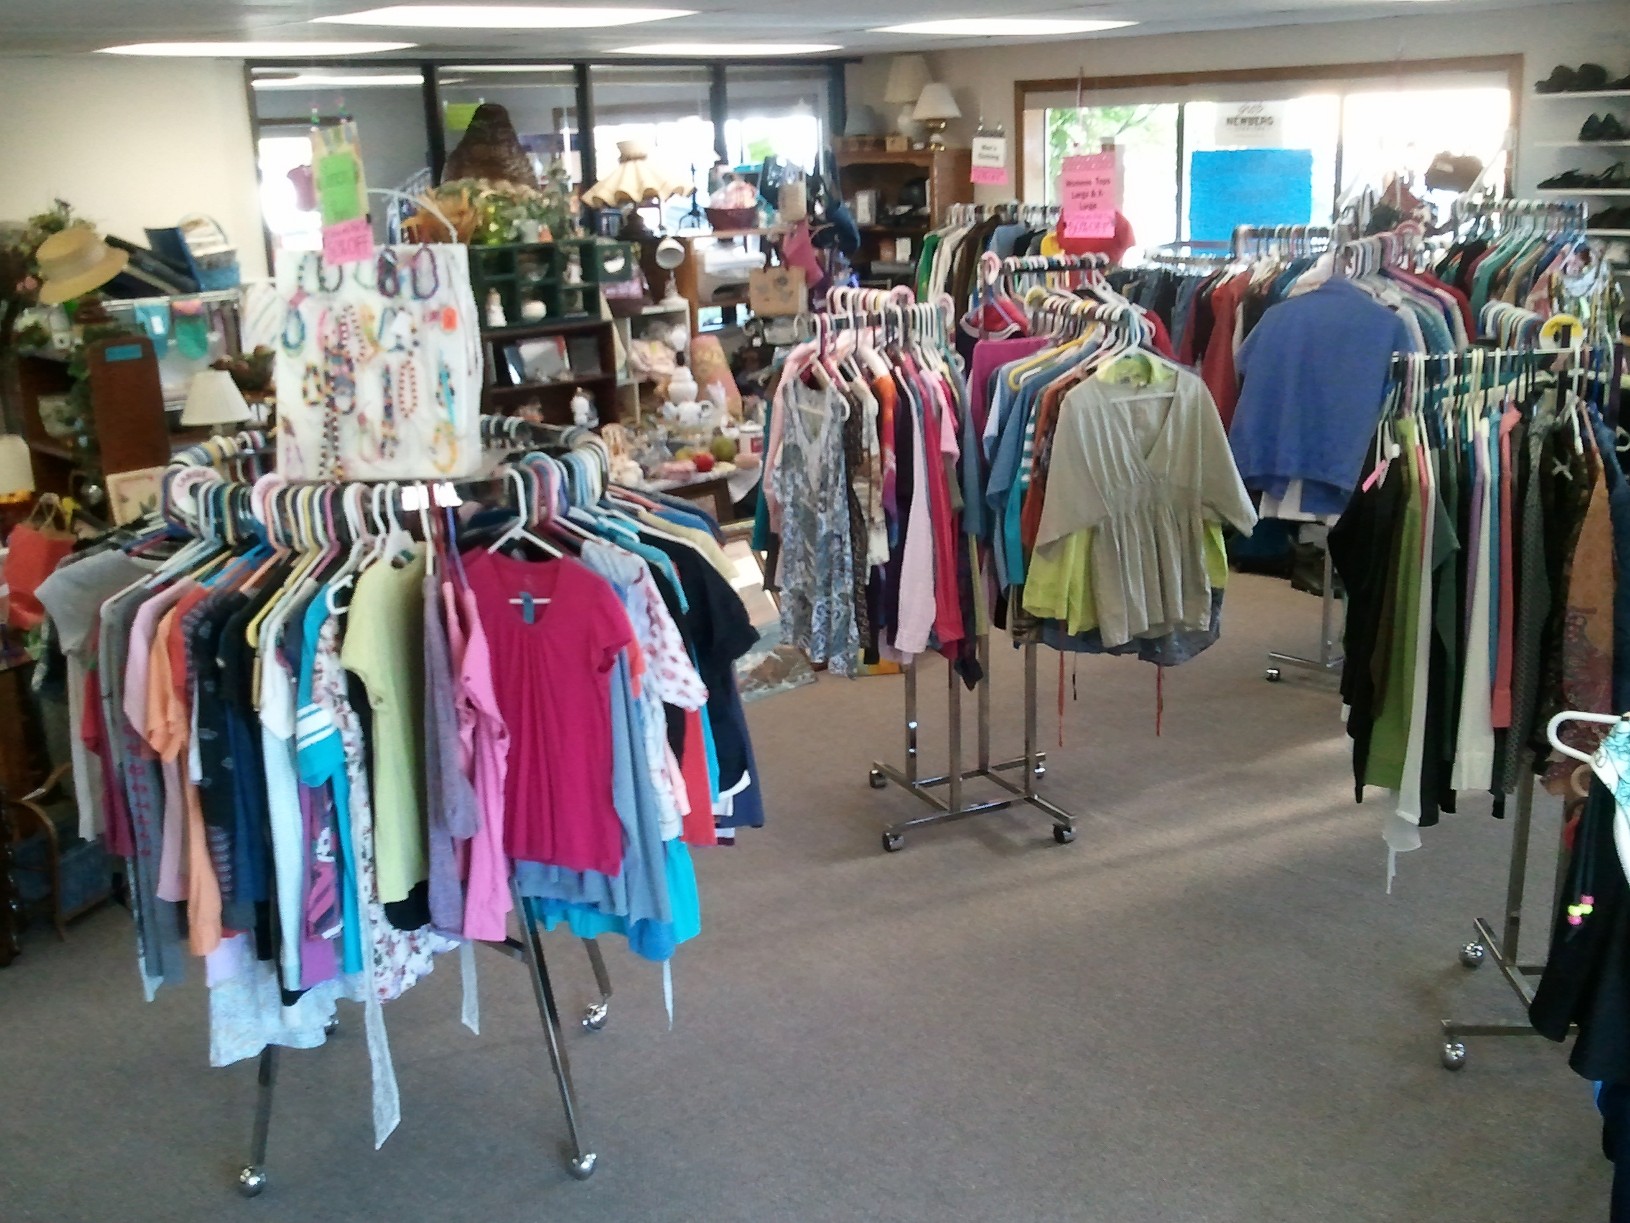 Lucky Finds Thrift Shop in Newberg, OR! | Clothes, Decor & More!